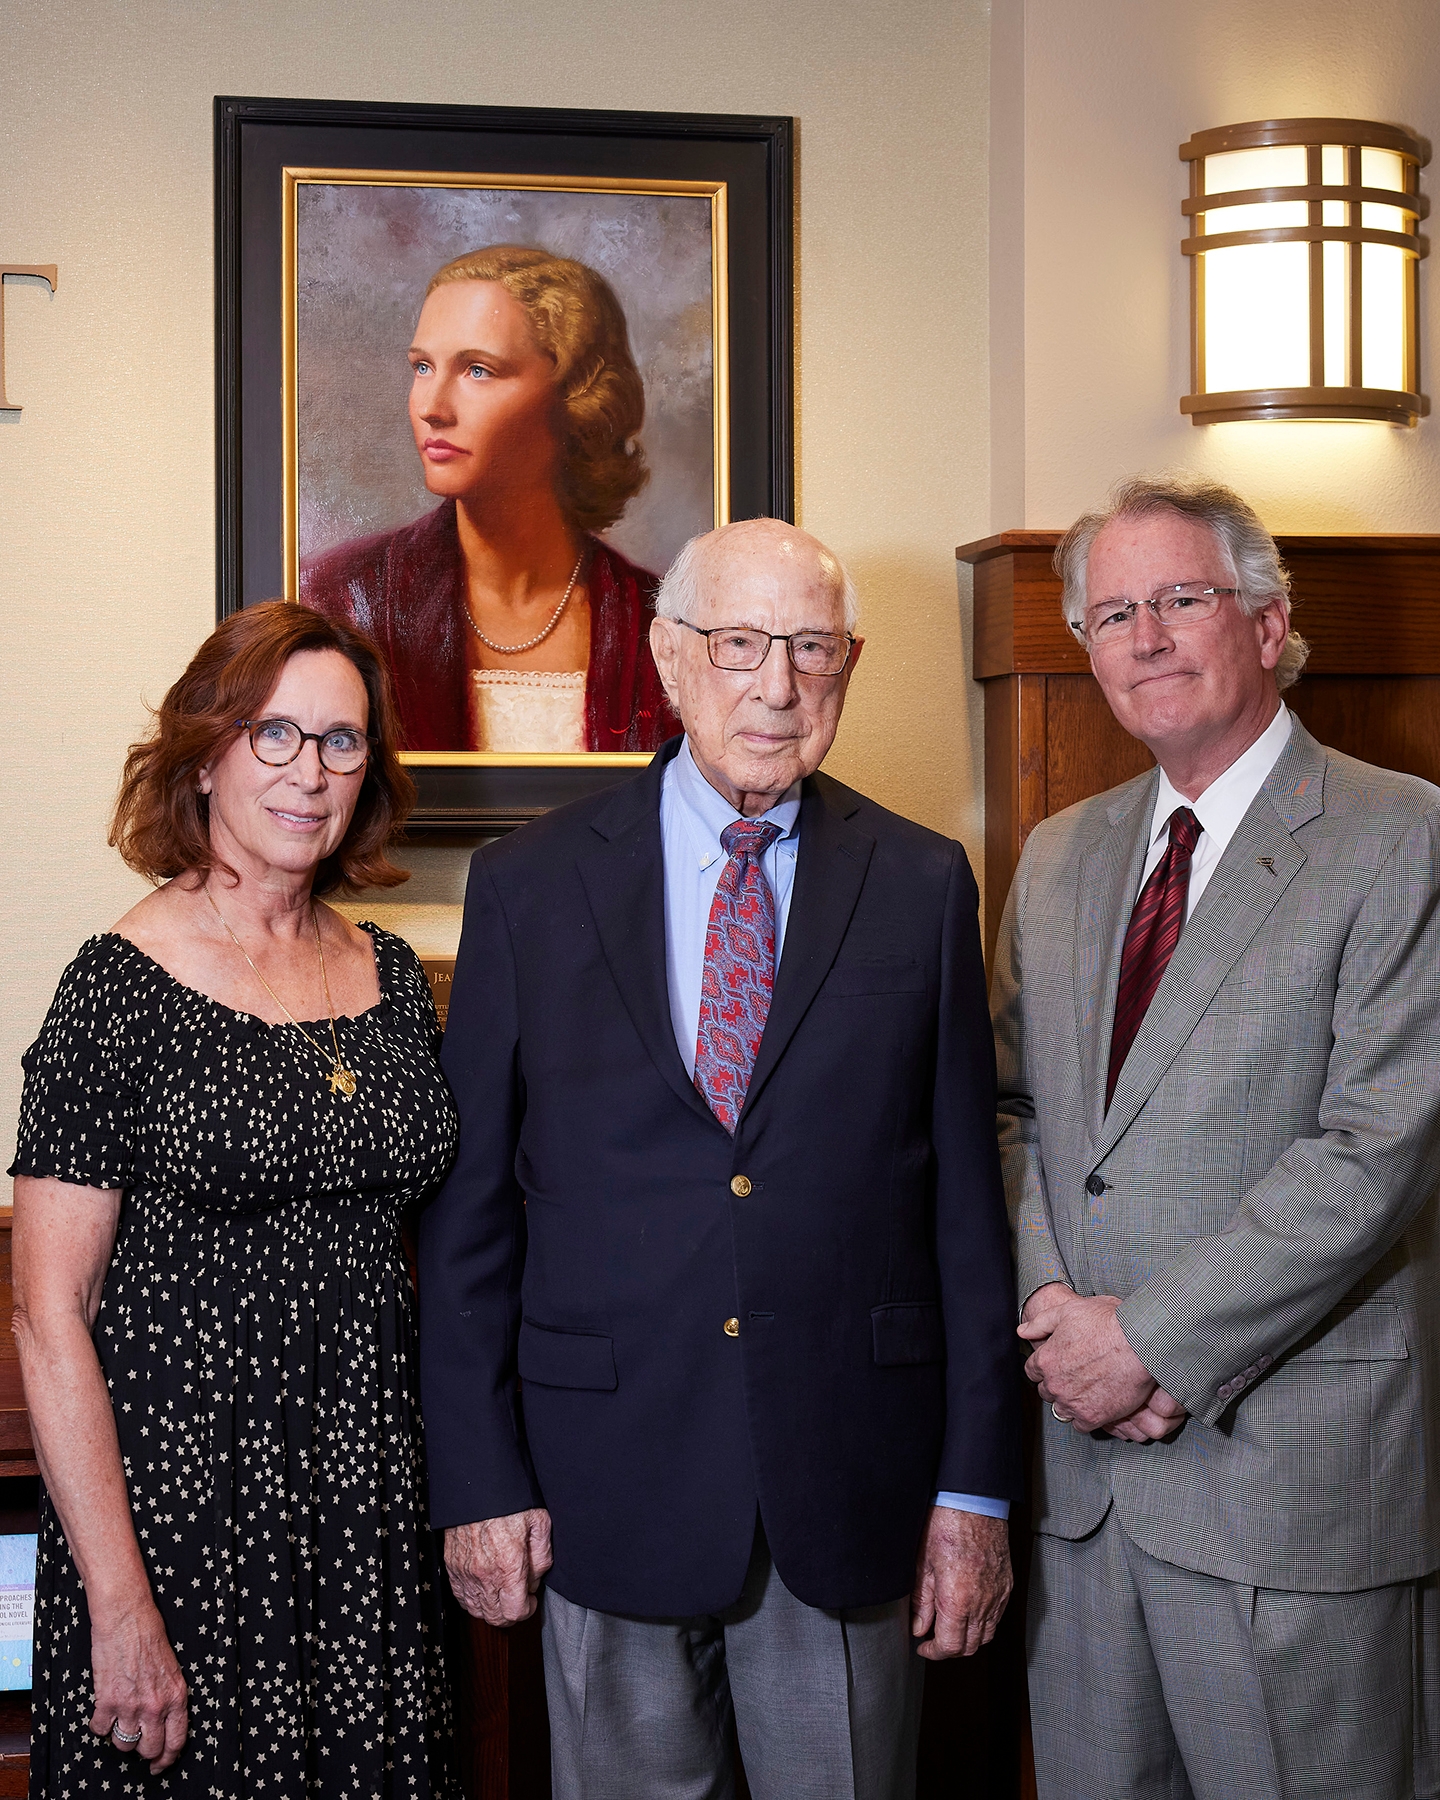 A woman and two men posing in front of a portrait on the wall